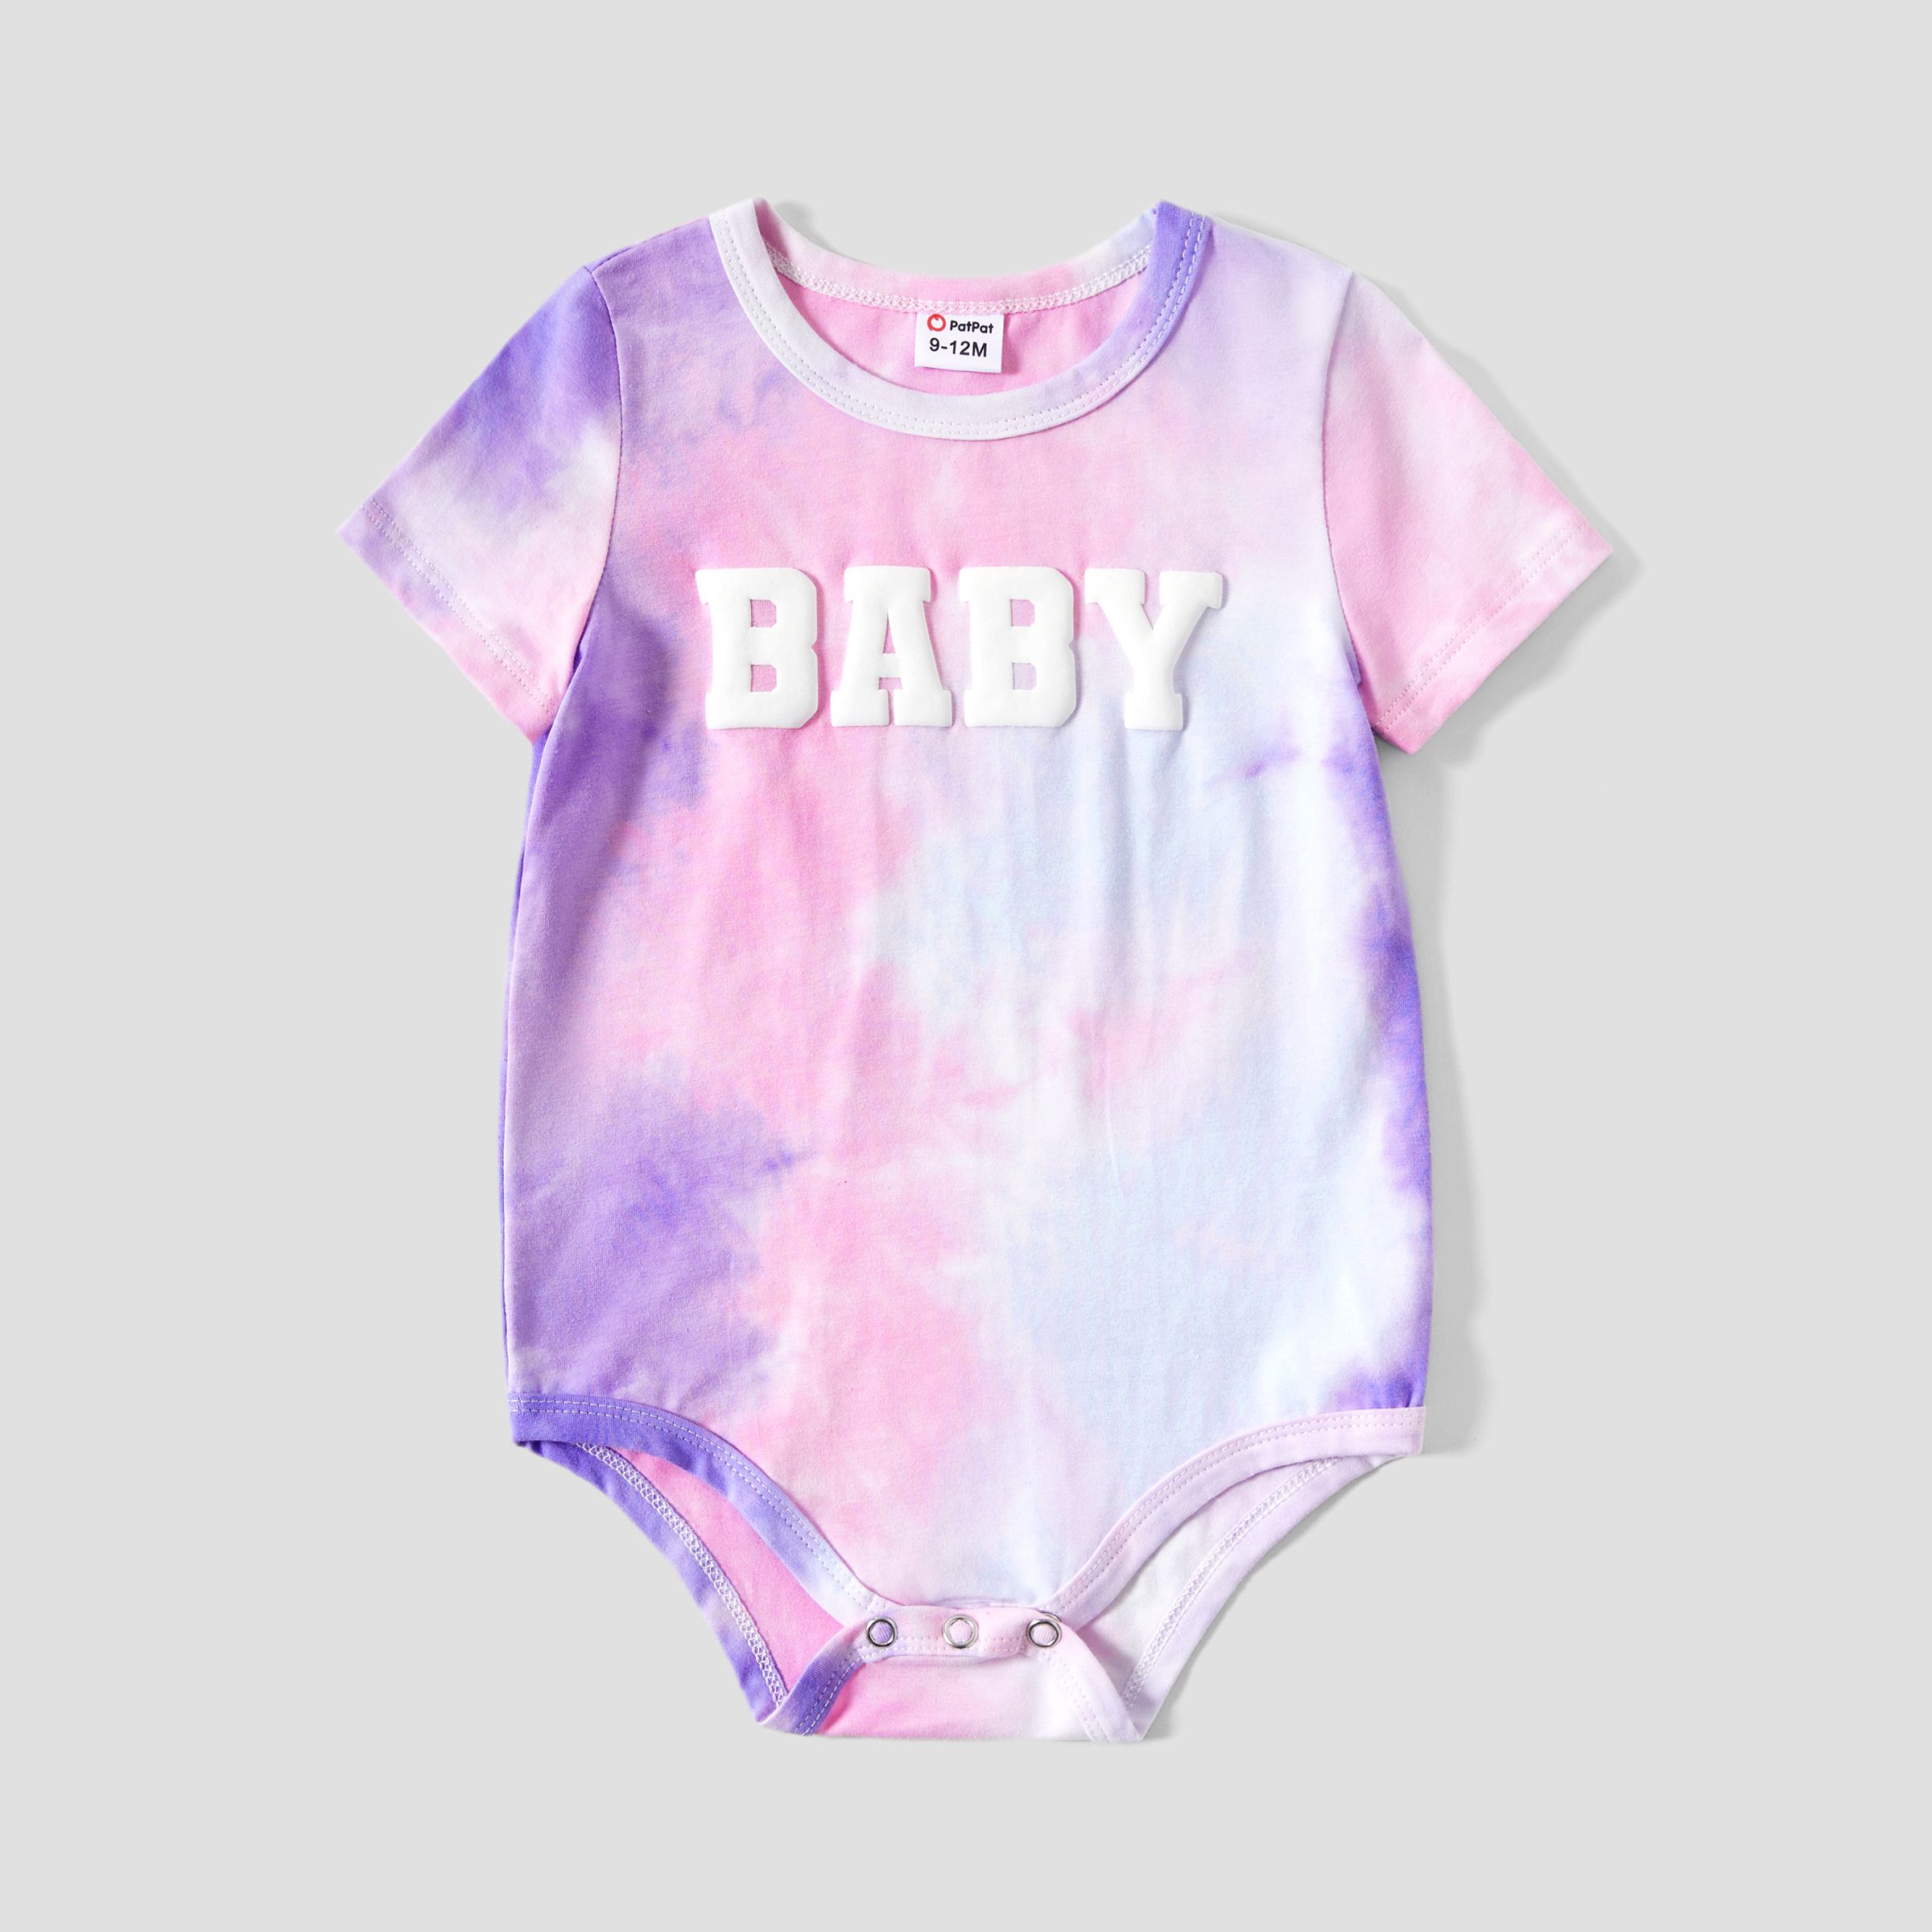 Mommy And Me Letter-Print Cotton Tie-Dye T-shirt